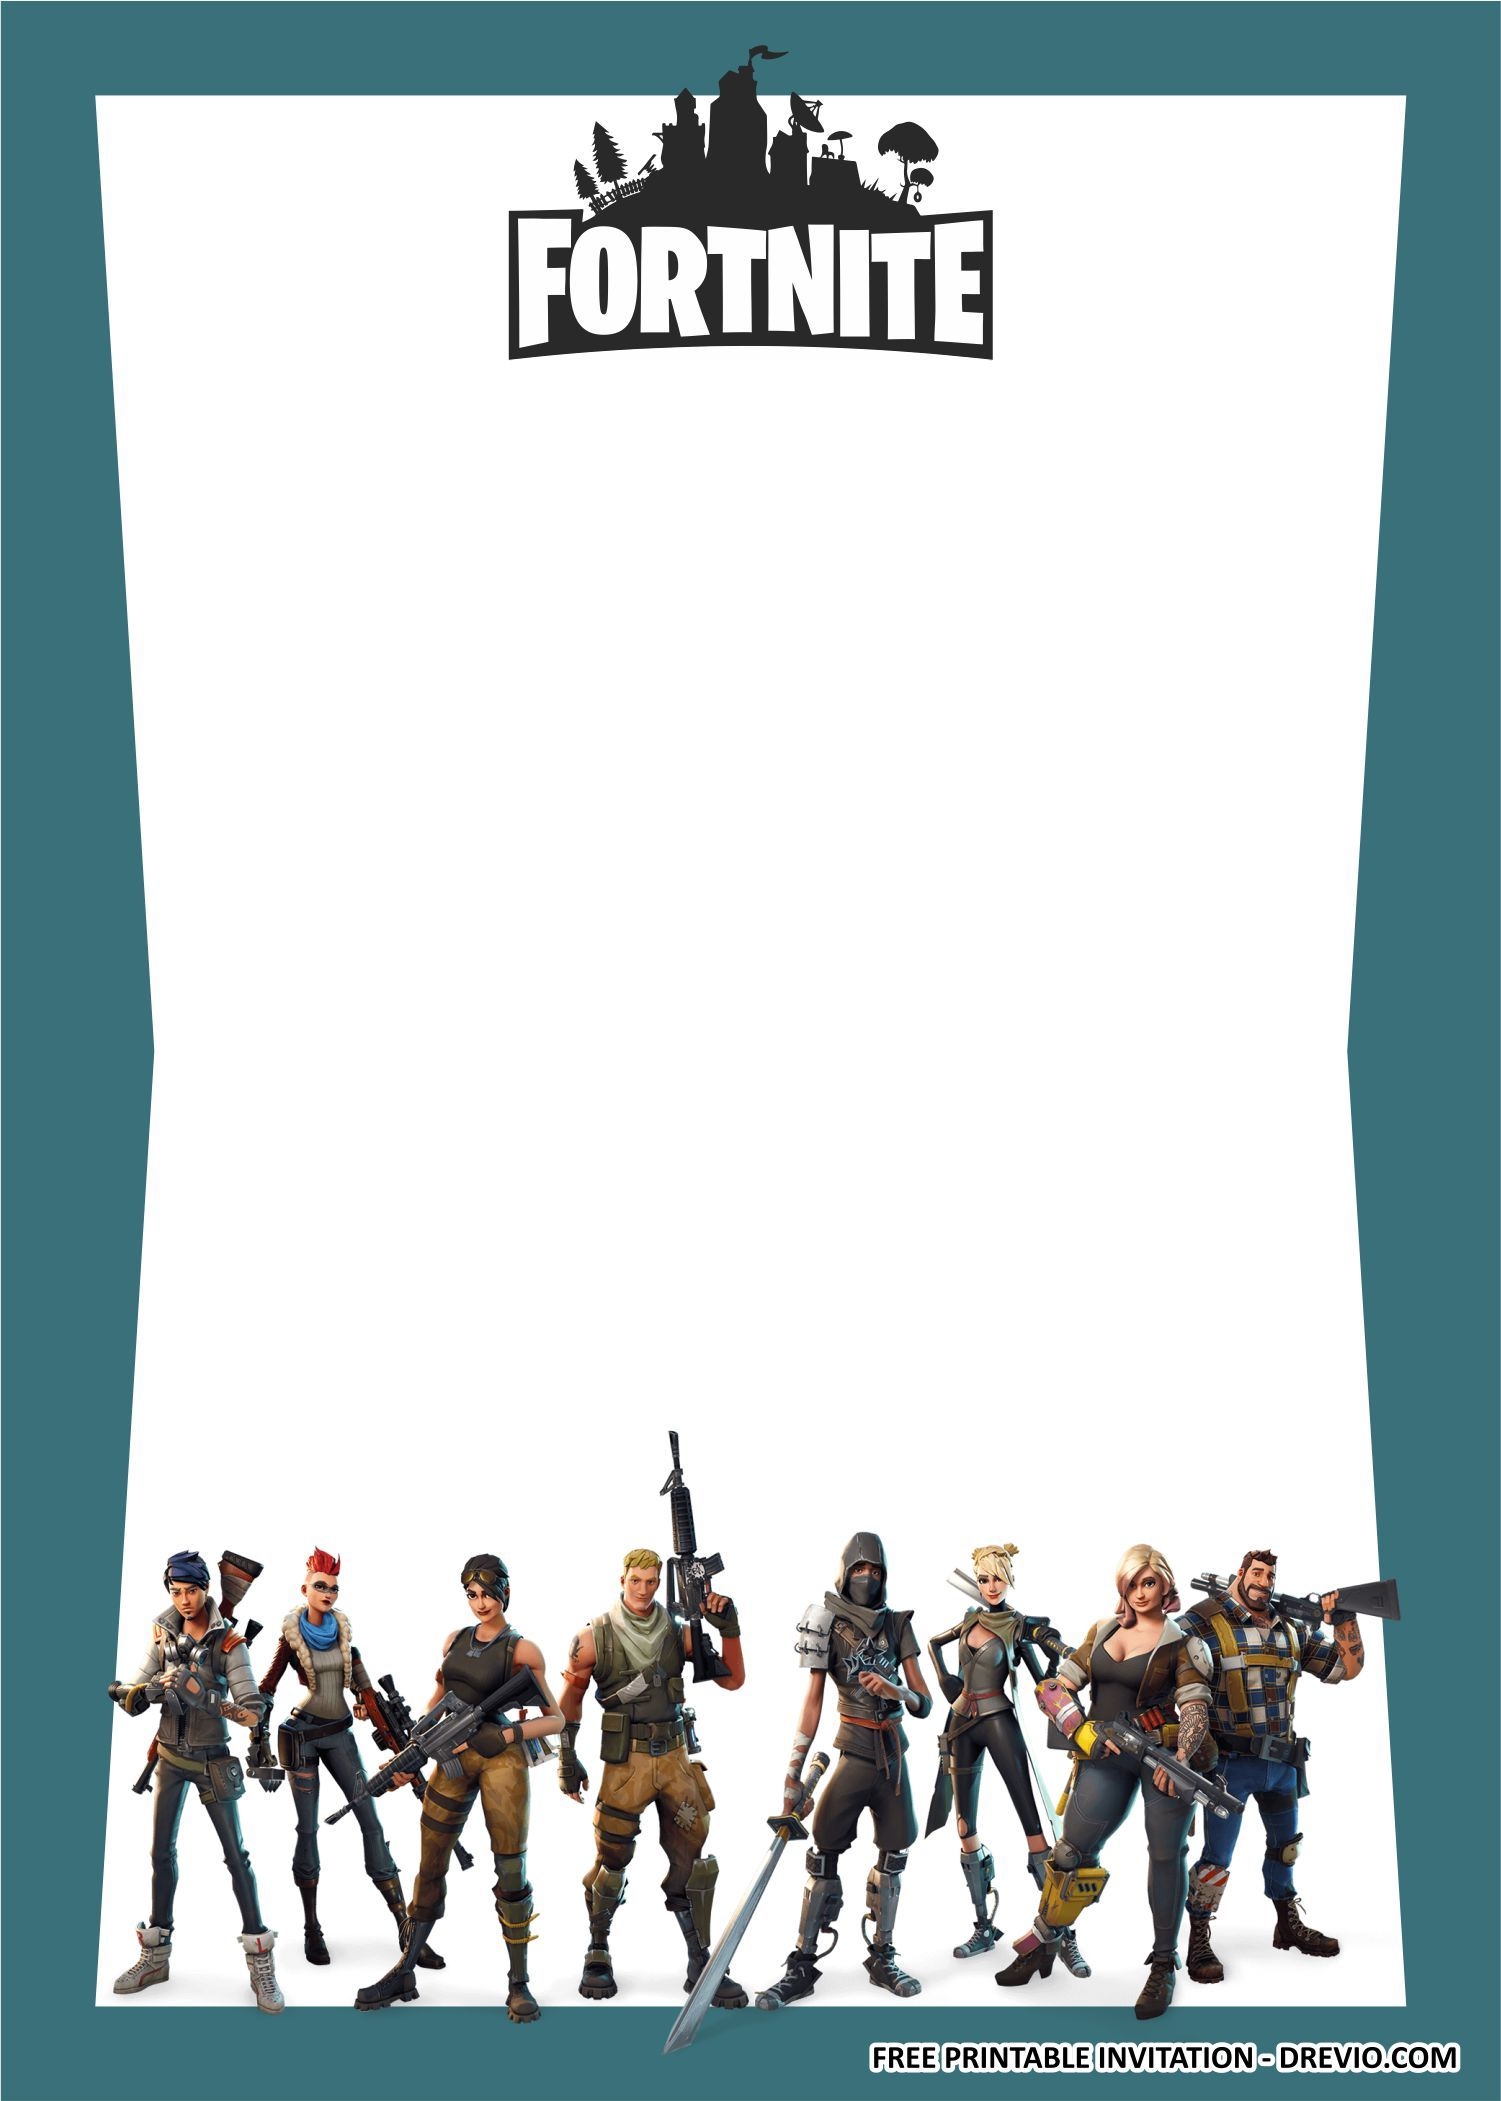 FREE PRINTABLE Fortnite 2 Birthday Party Kits Templates Free And Match For This Modern Era Free Printable Birthday Invitations Birthday Party Invitations Free Printable Birthday Invitations